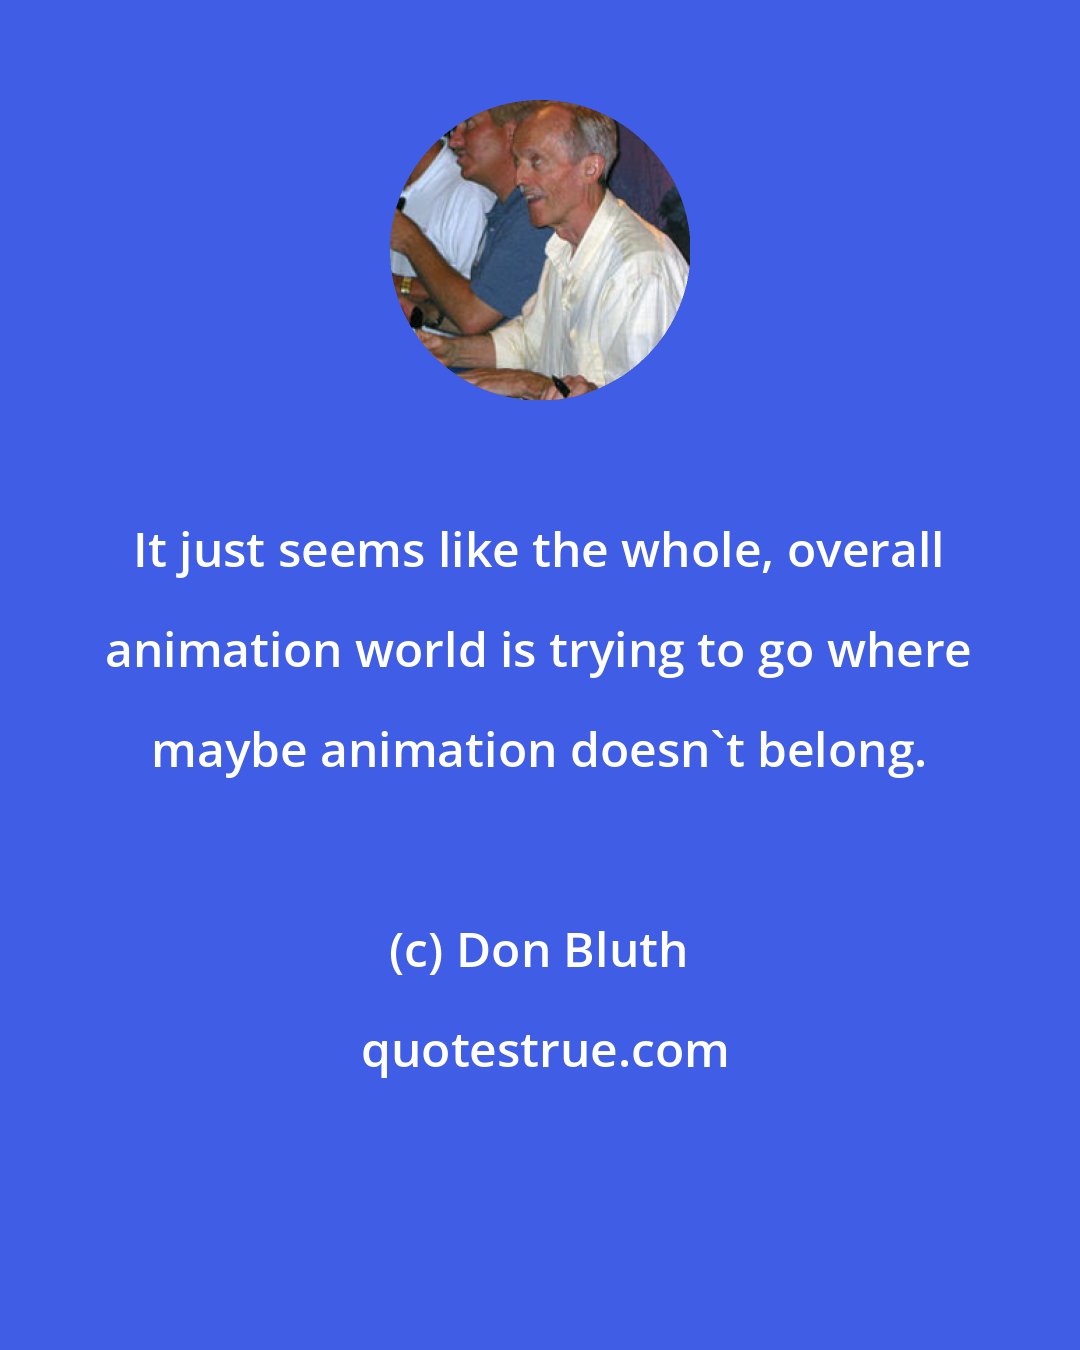 Don Bluth: It just seems like the whole, overall animation world is trying to go where maybe animation doesn't belong.